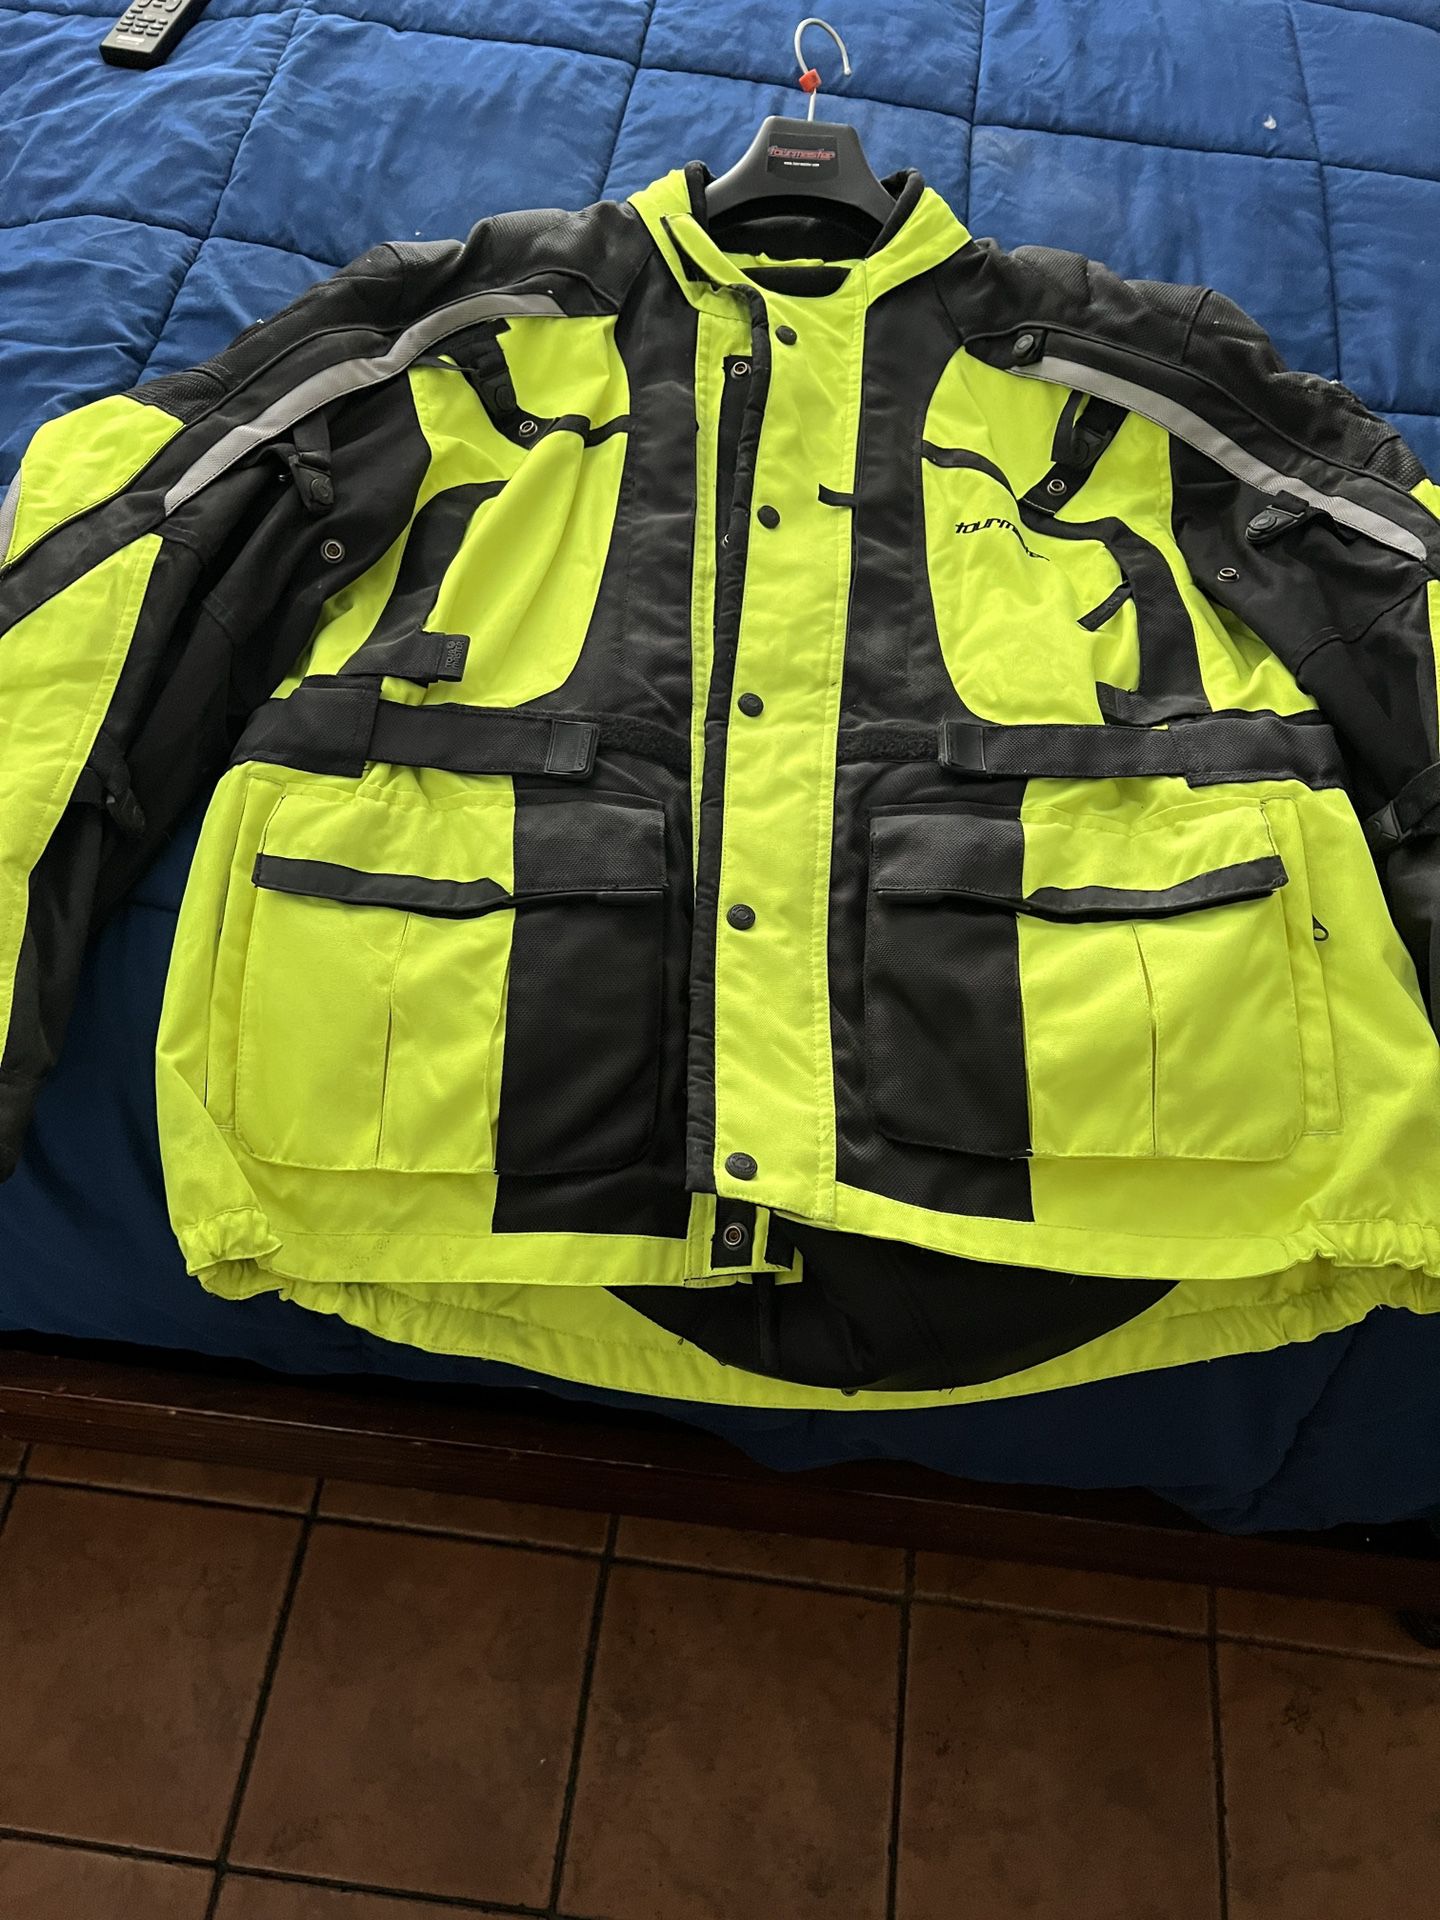 Motorcycle Touring Jacket  3xl Used For 30  Min Ride Perfect Has Back Supprte Sofr Armor Awesome  jacket